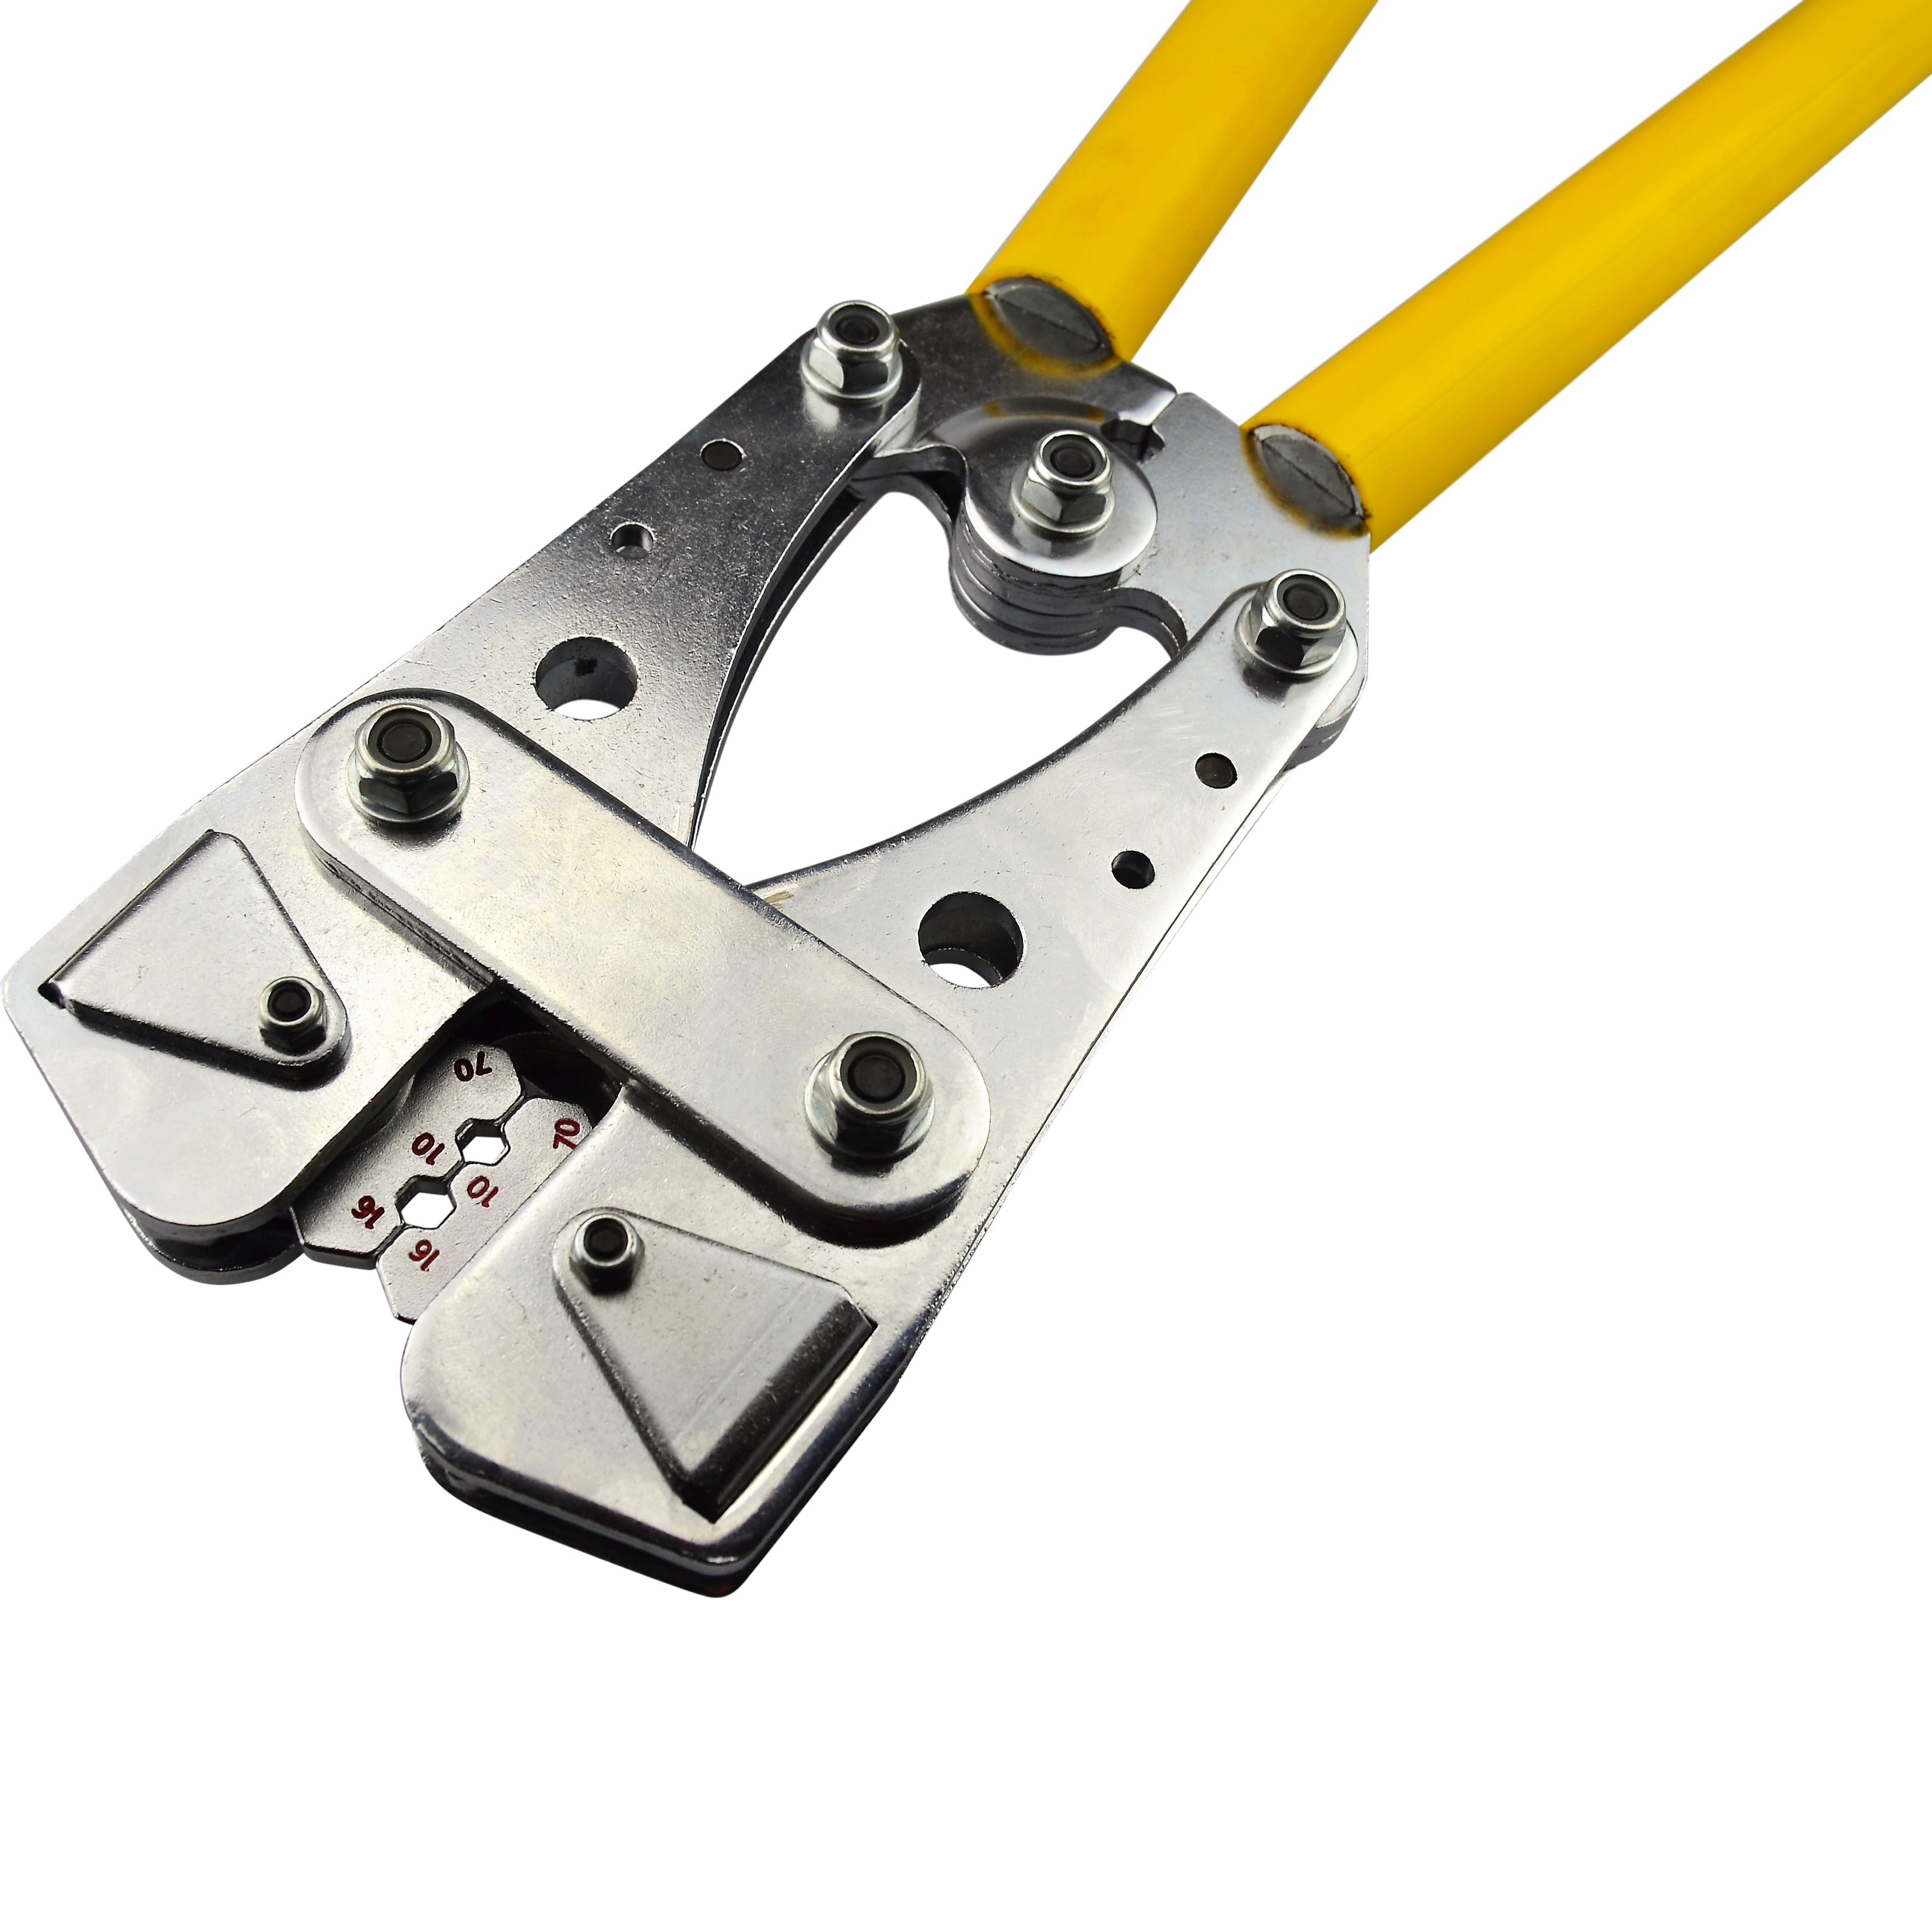 Hexagonal Crimping Tool for Copper Tube Terminals 25-150mm²